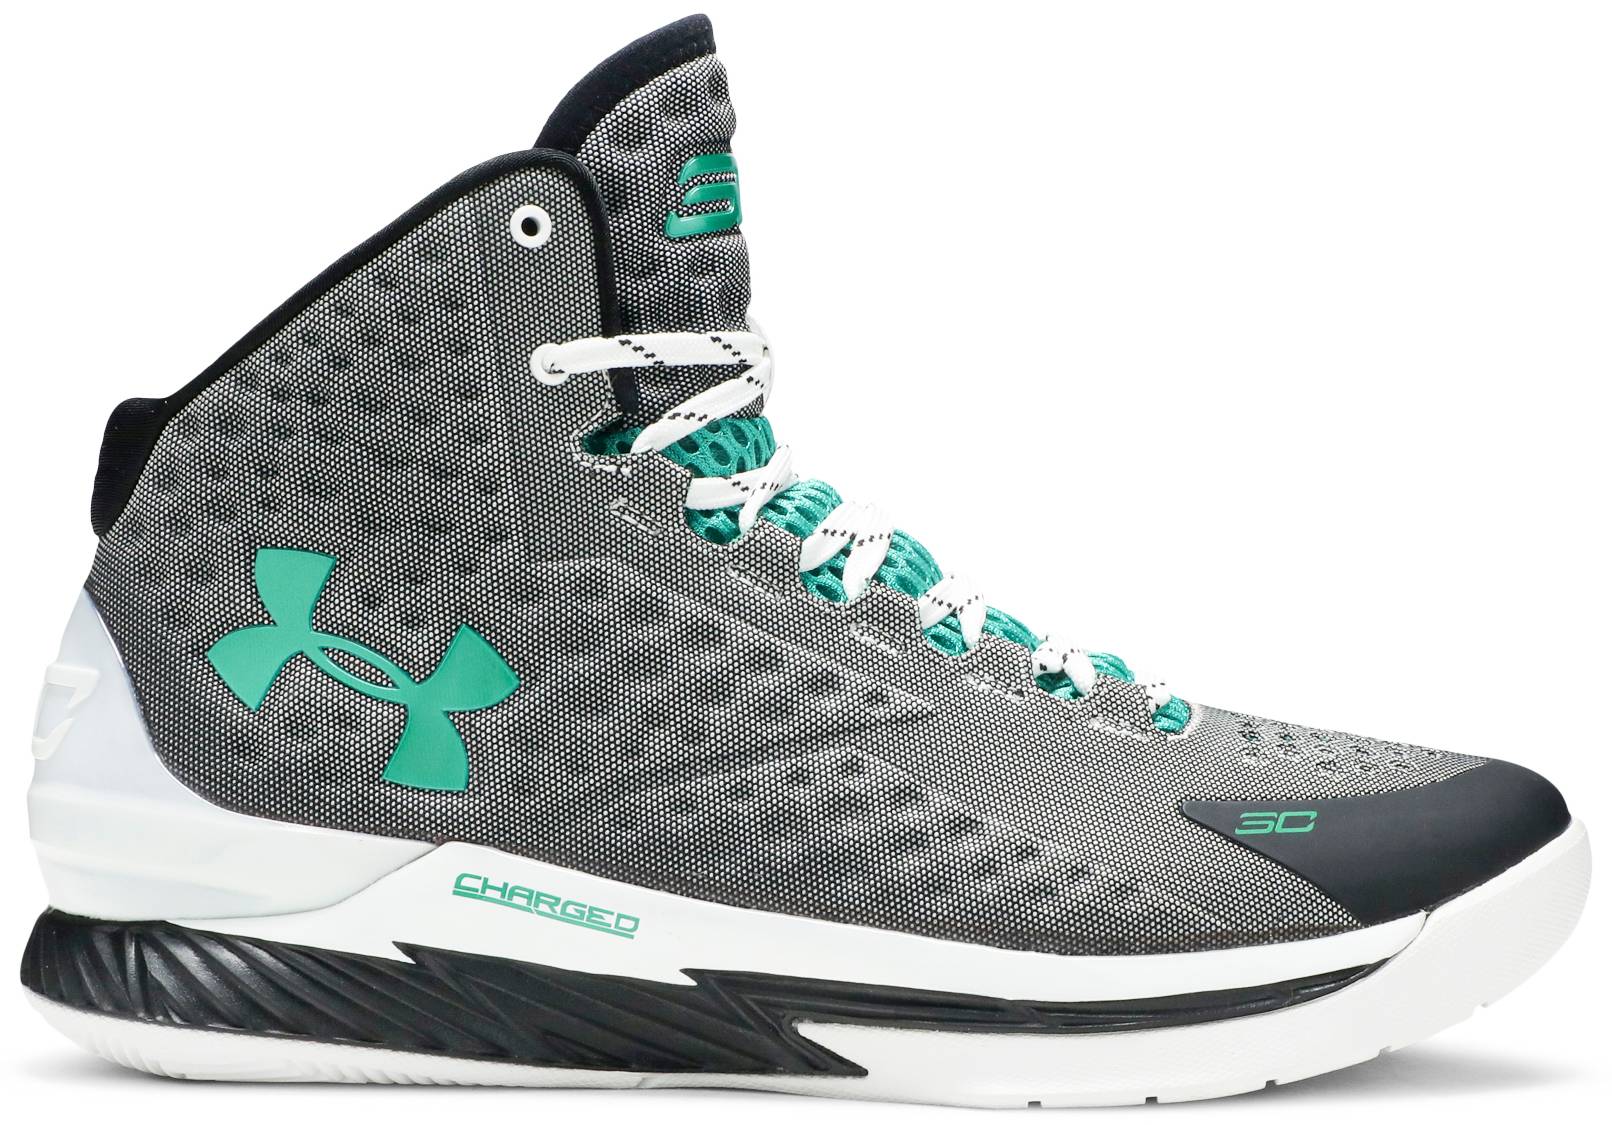 Curry 1 'Golf' - Under Armour - 1258723 100 | GOAT